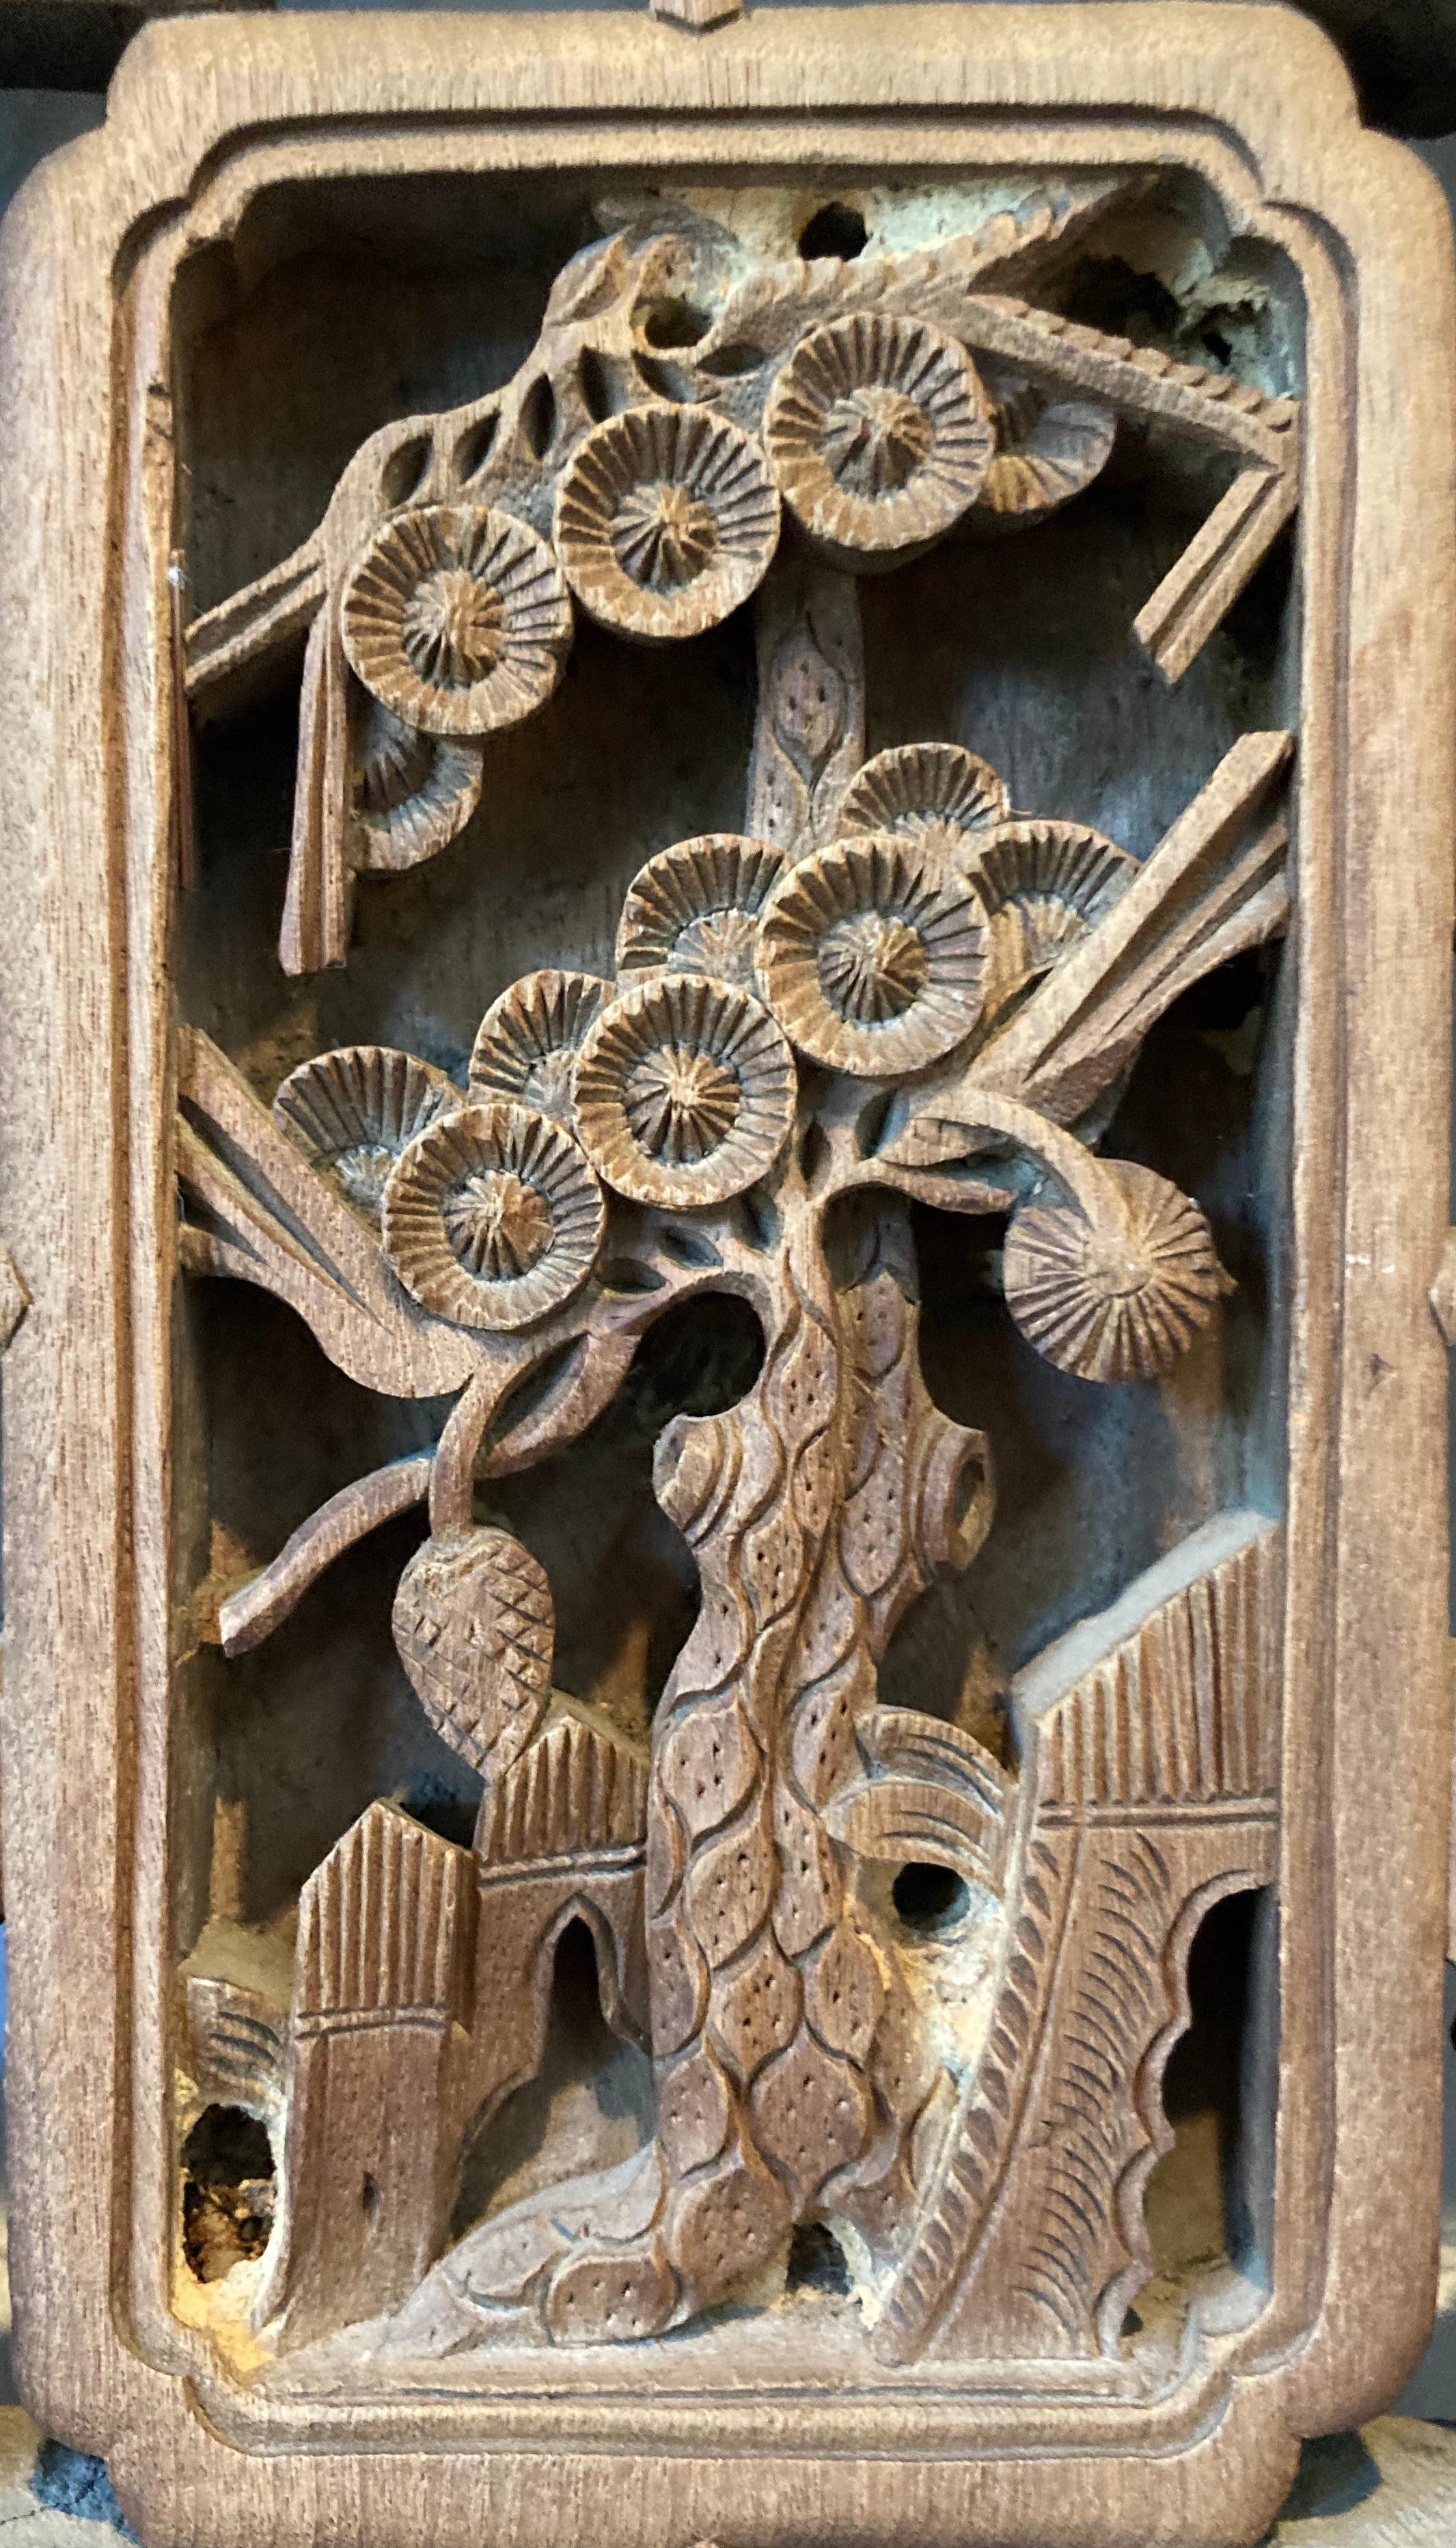 Framed panel with mitered mortise and tenon joints. Panel includes three panes, with openwork and relief carvings. Panes include rectangular center carving with floral motif.